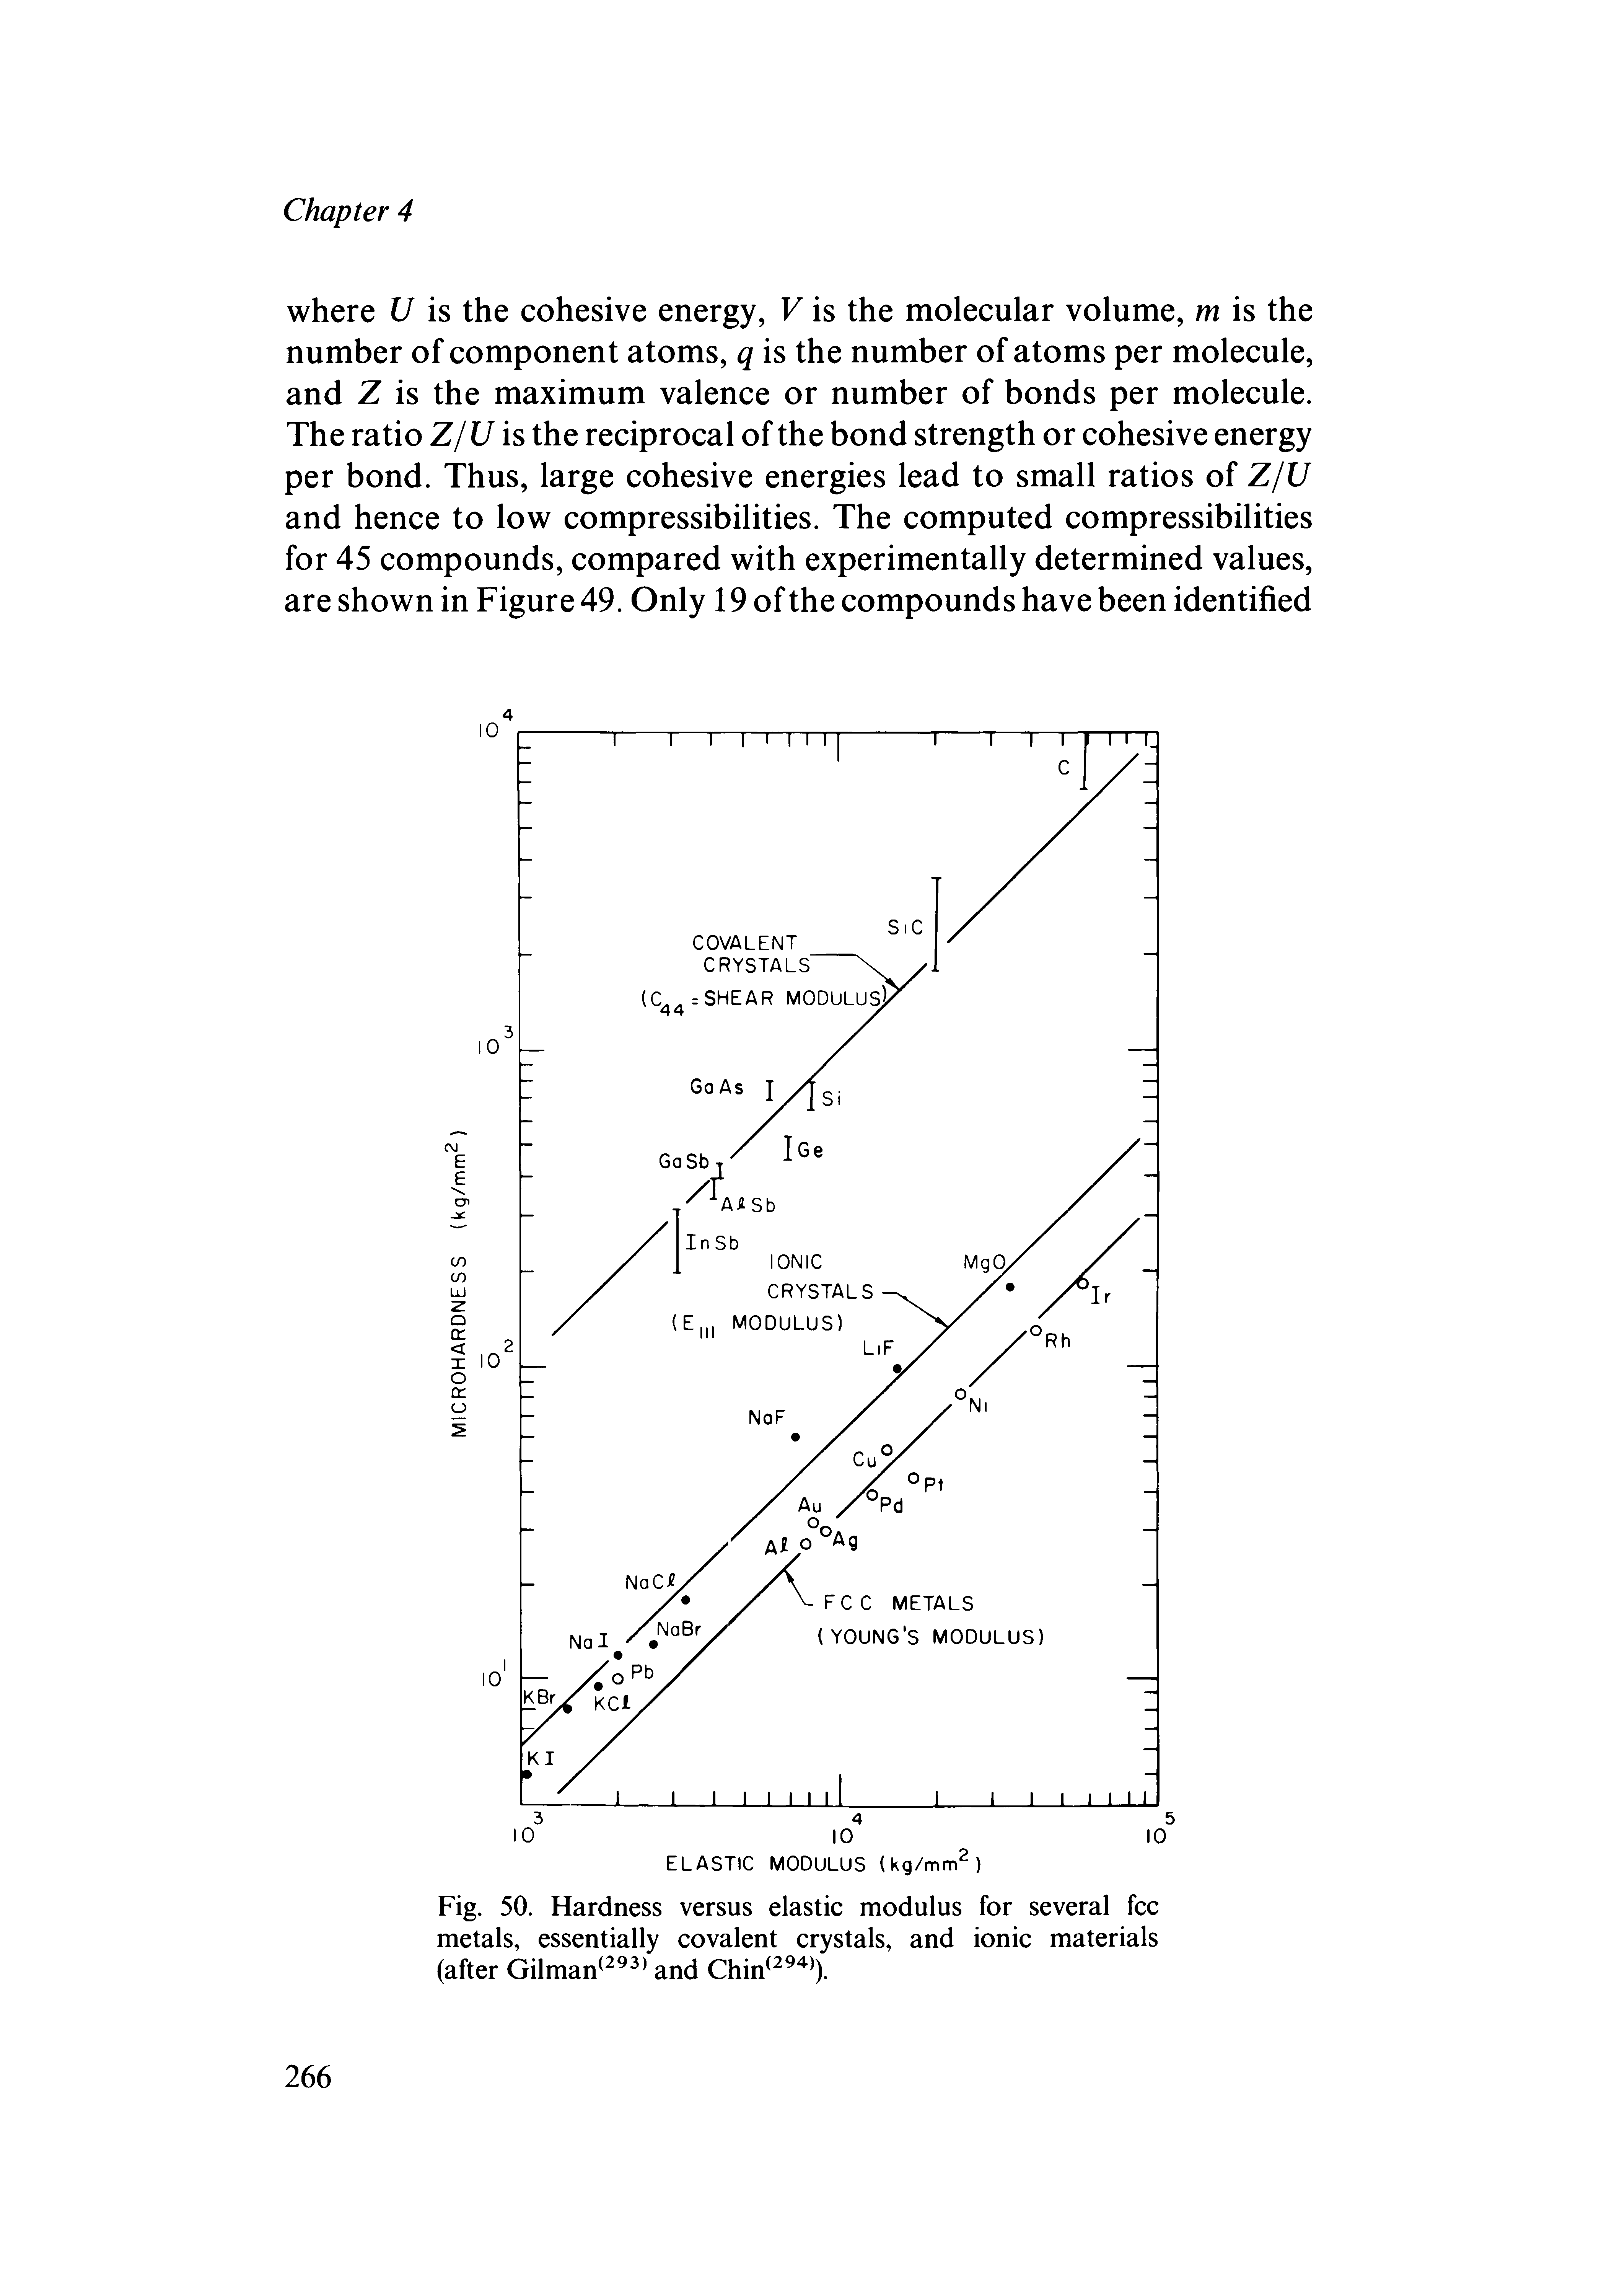 Fig. 50. Hardness versus elastic modulus for several fee metals, essentially covalent crystals, and ionic materials (after Gilman and Chin ).